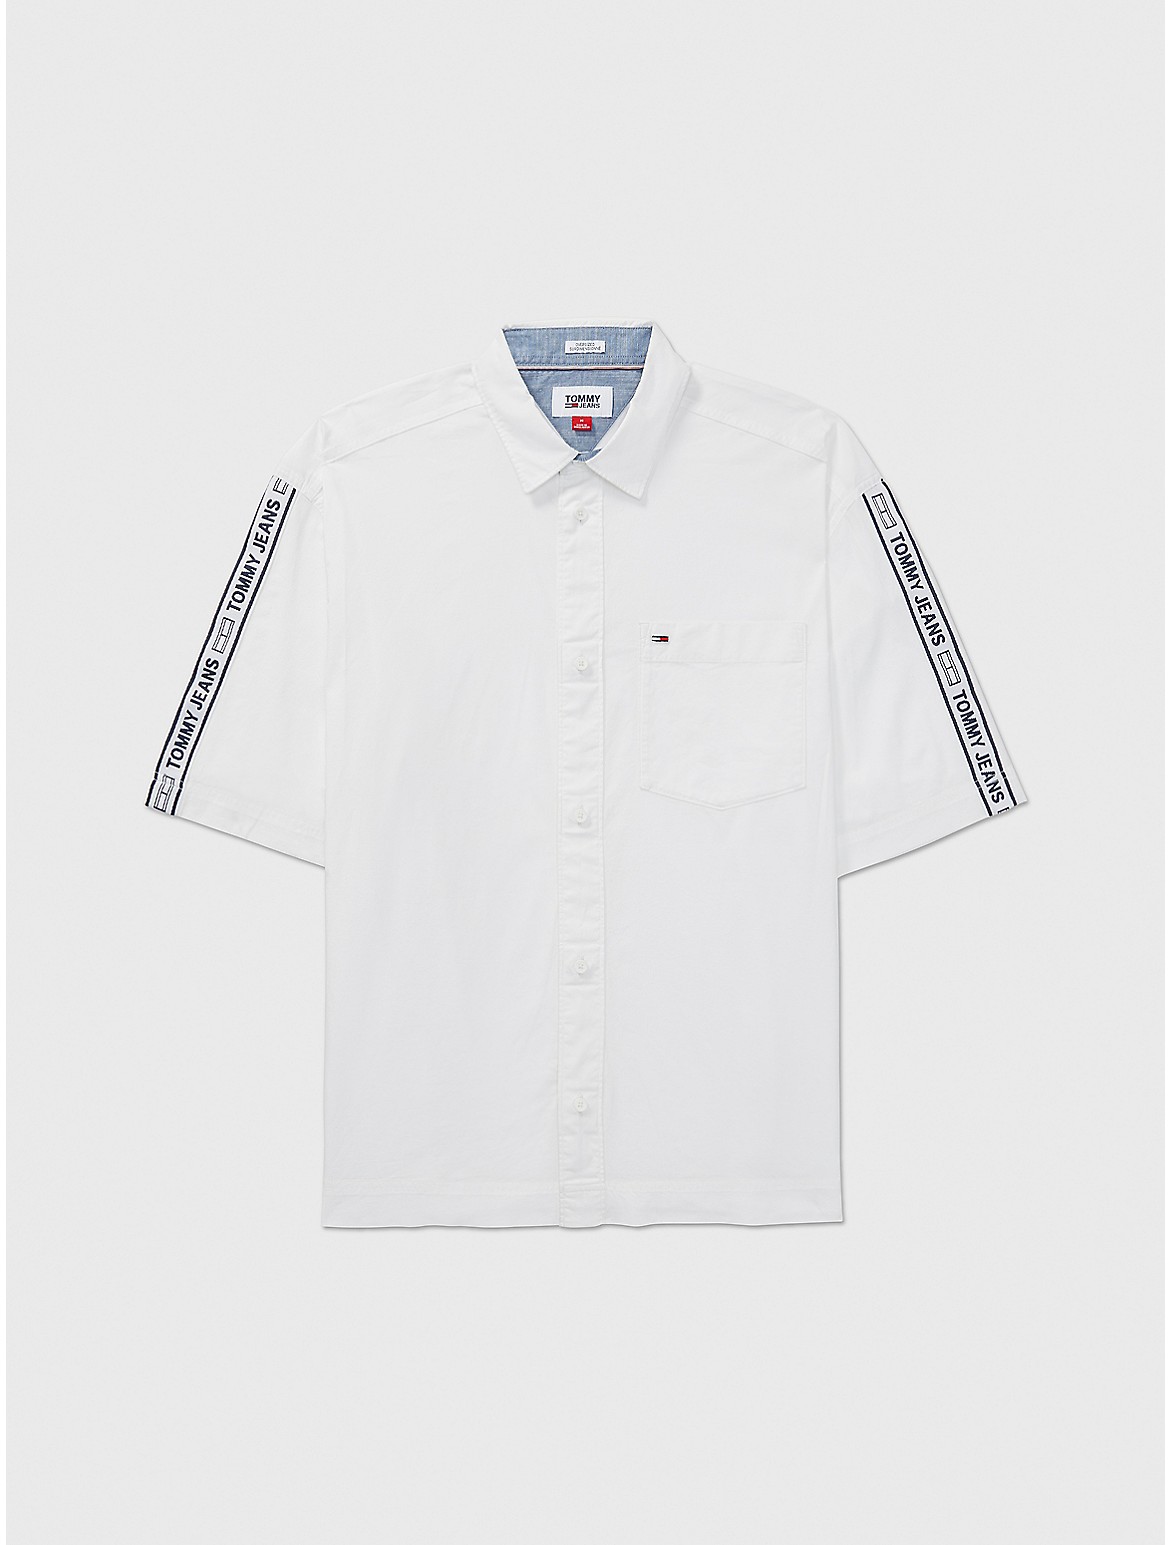 Tommy Hilfiger Men's Relaxed Fit Contrast Tape Shirt